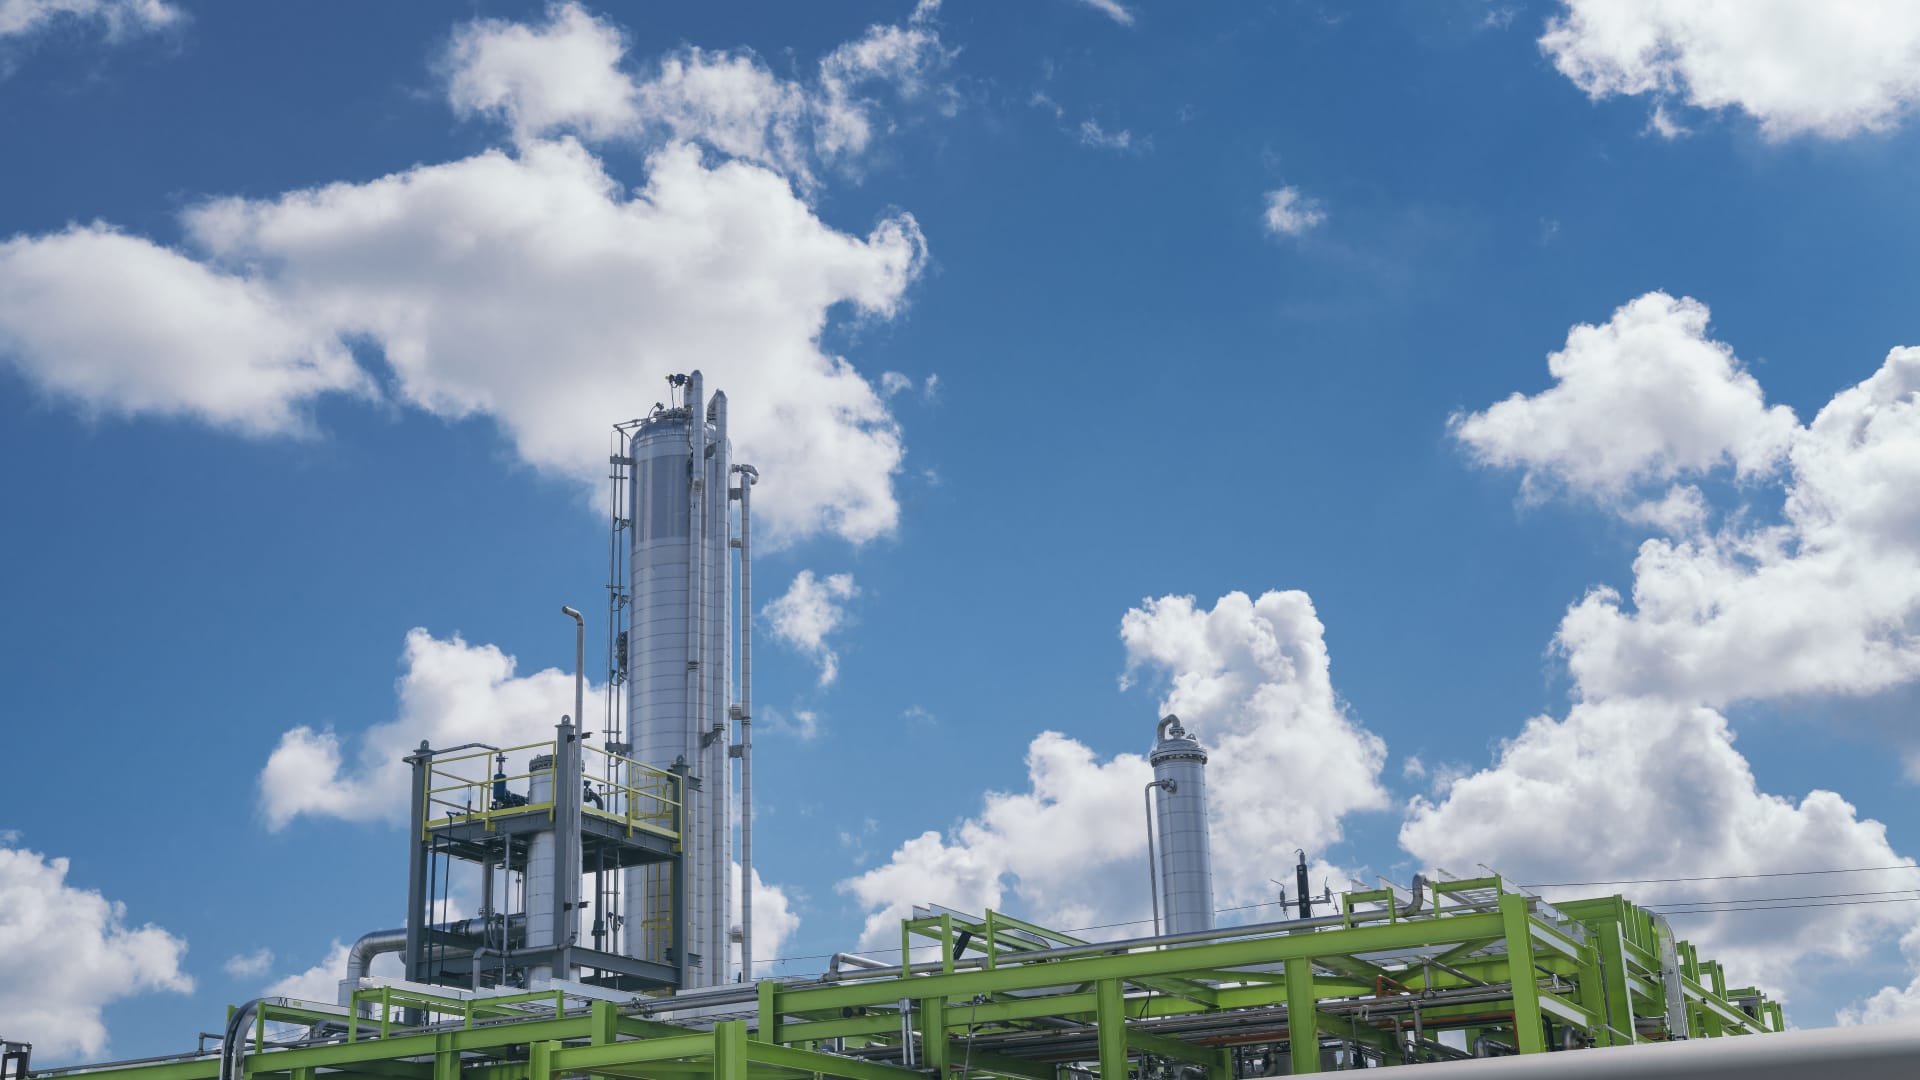 Solugen established its first sustainable chemicals factory in Stafford, Texas. The company took over a property where a petroleum wax distillery exploded in 2005.